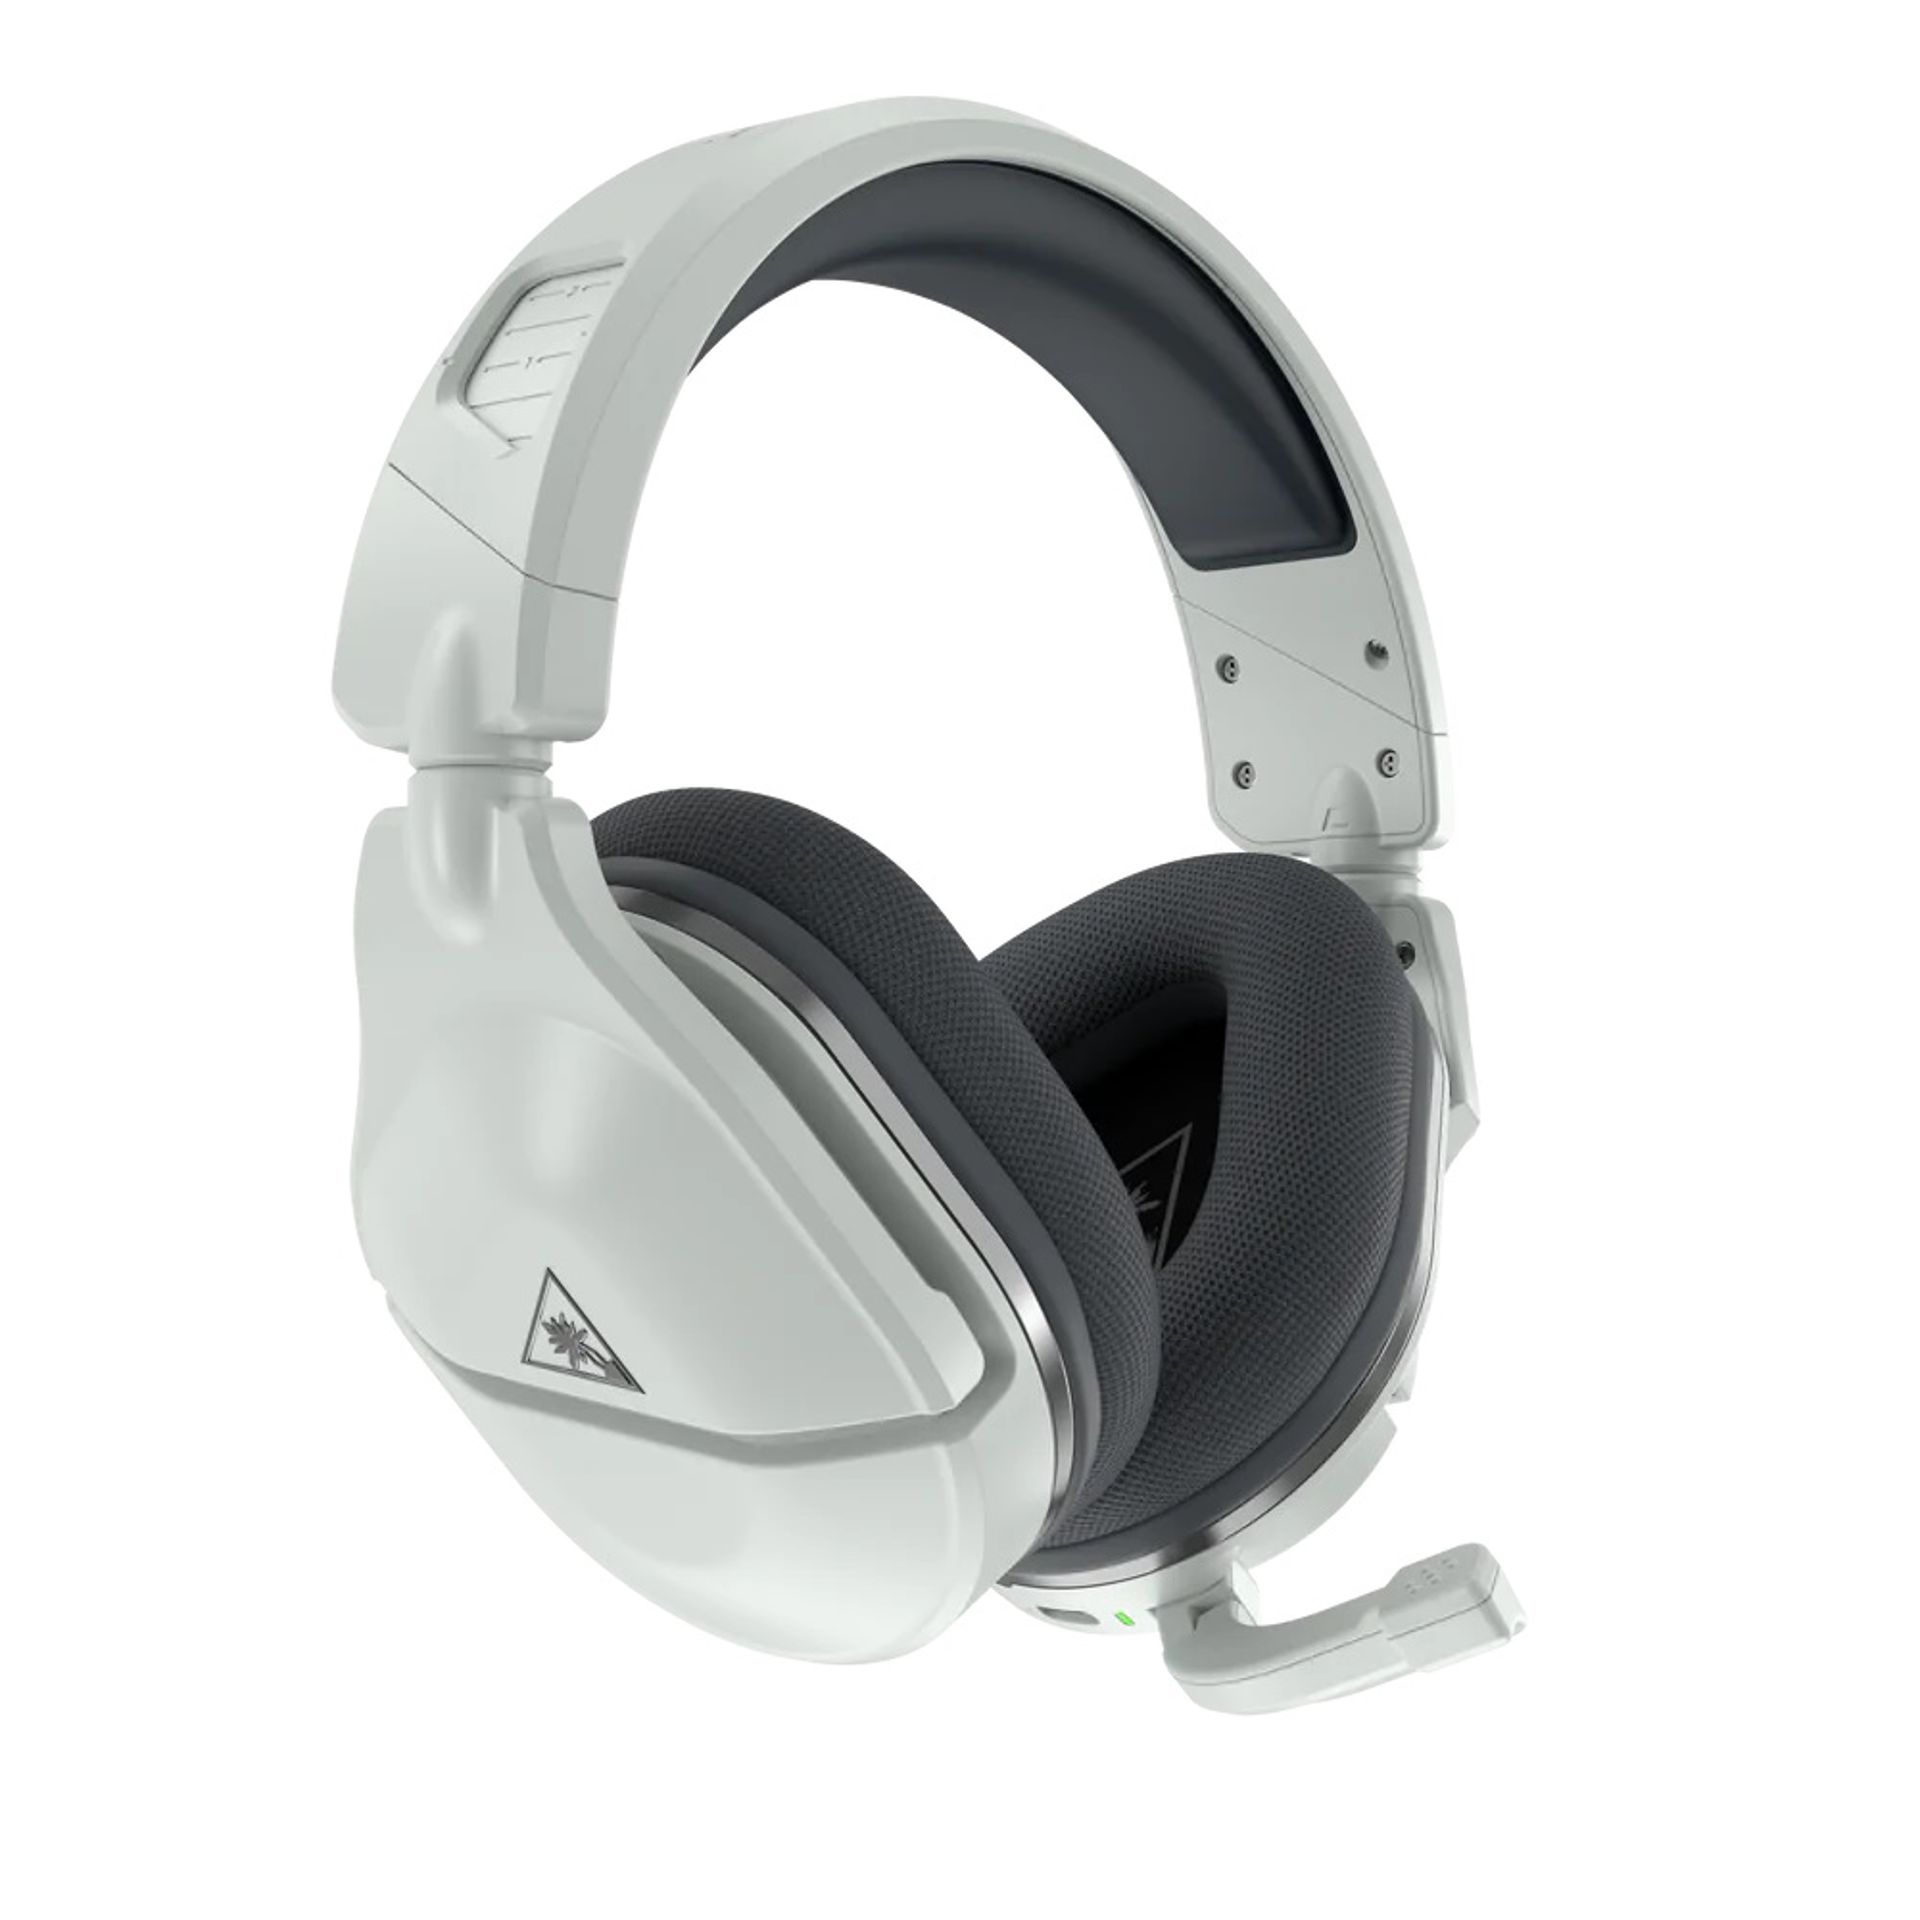 Casque gaming pour Xbox One Turtle Beach pas cher - Achat neuf et